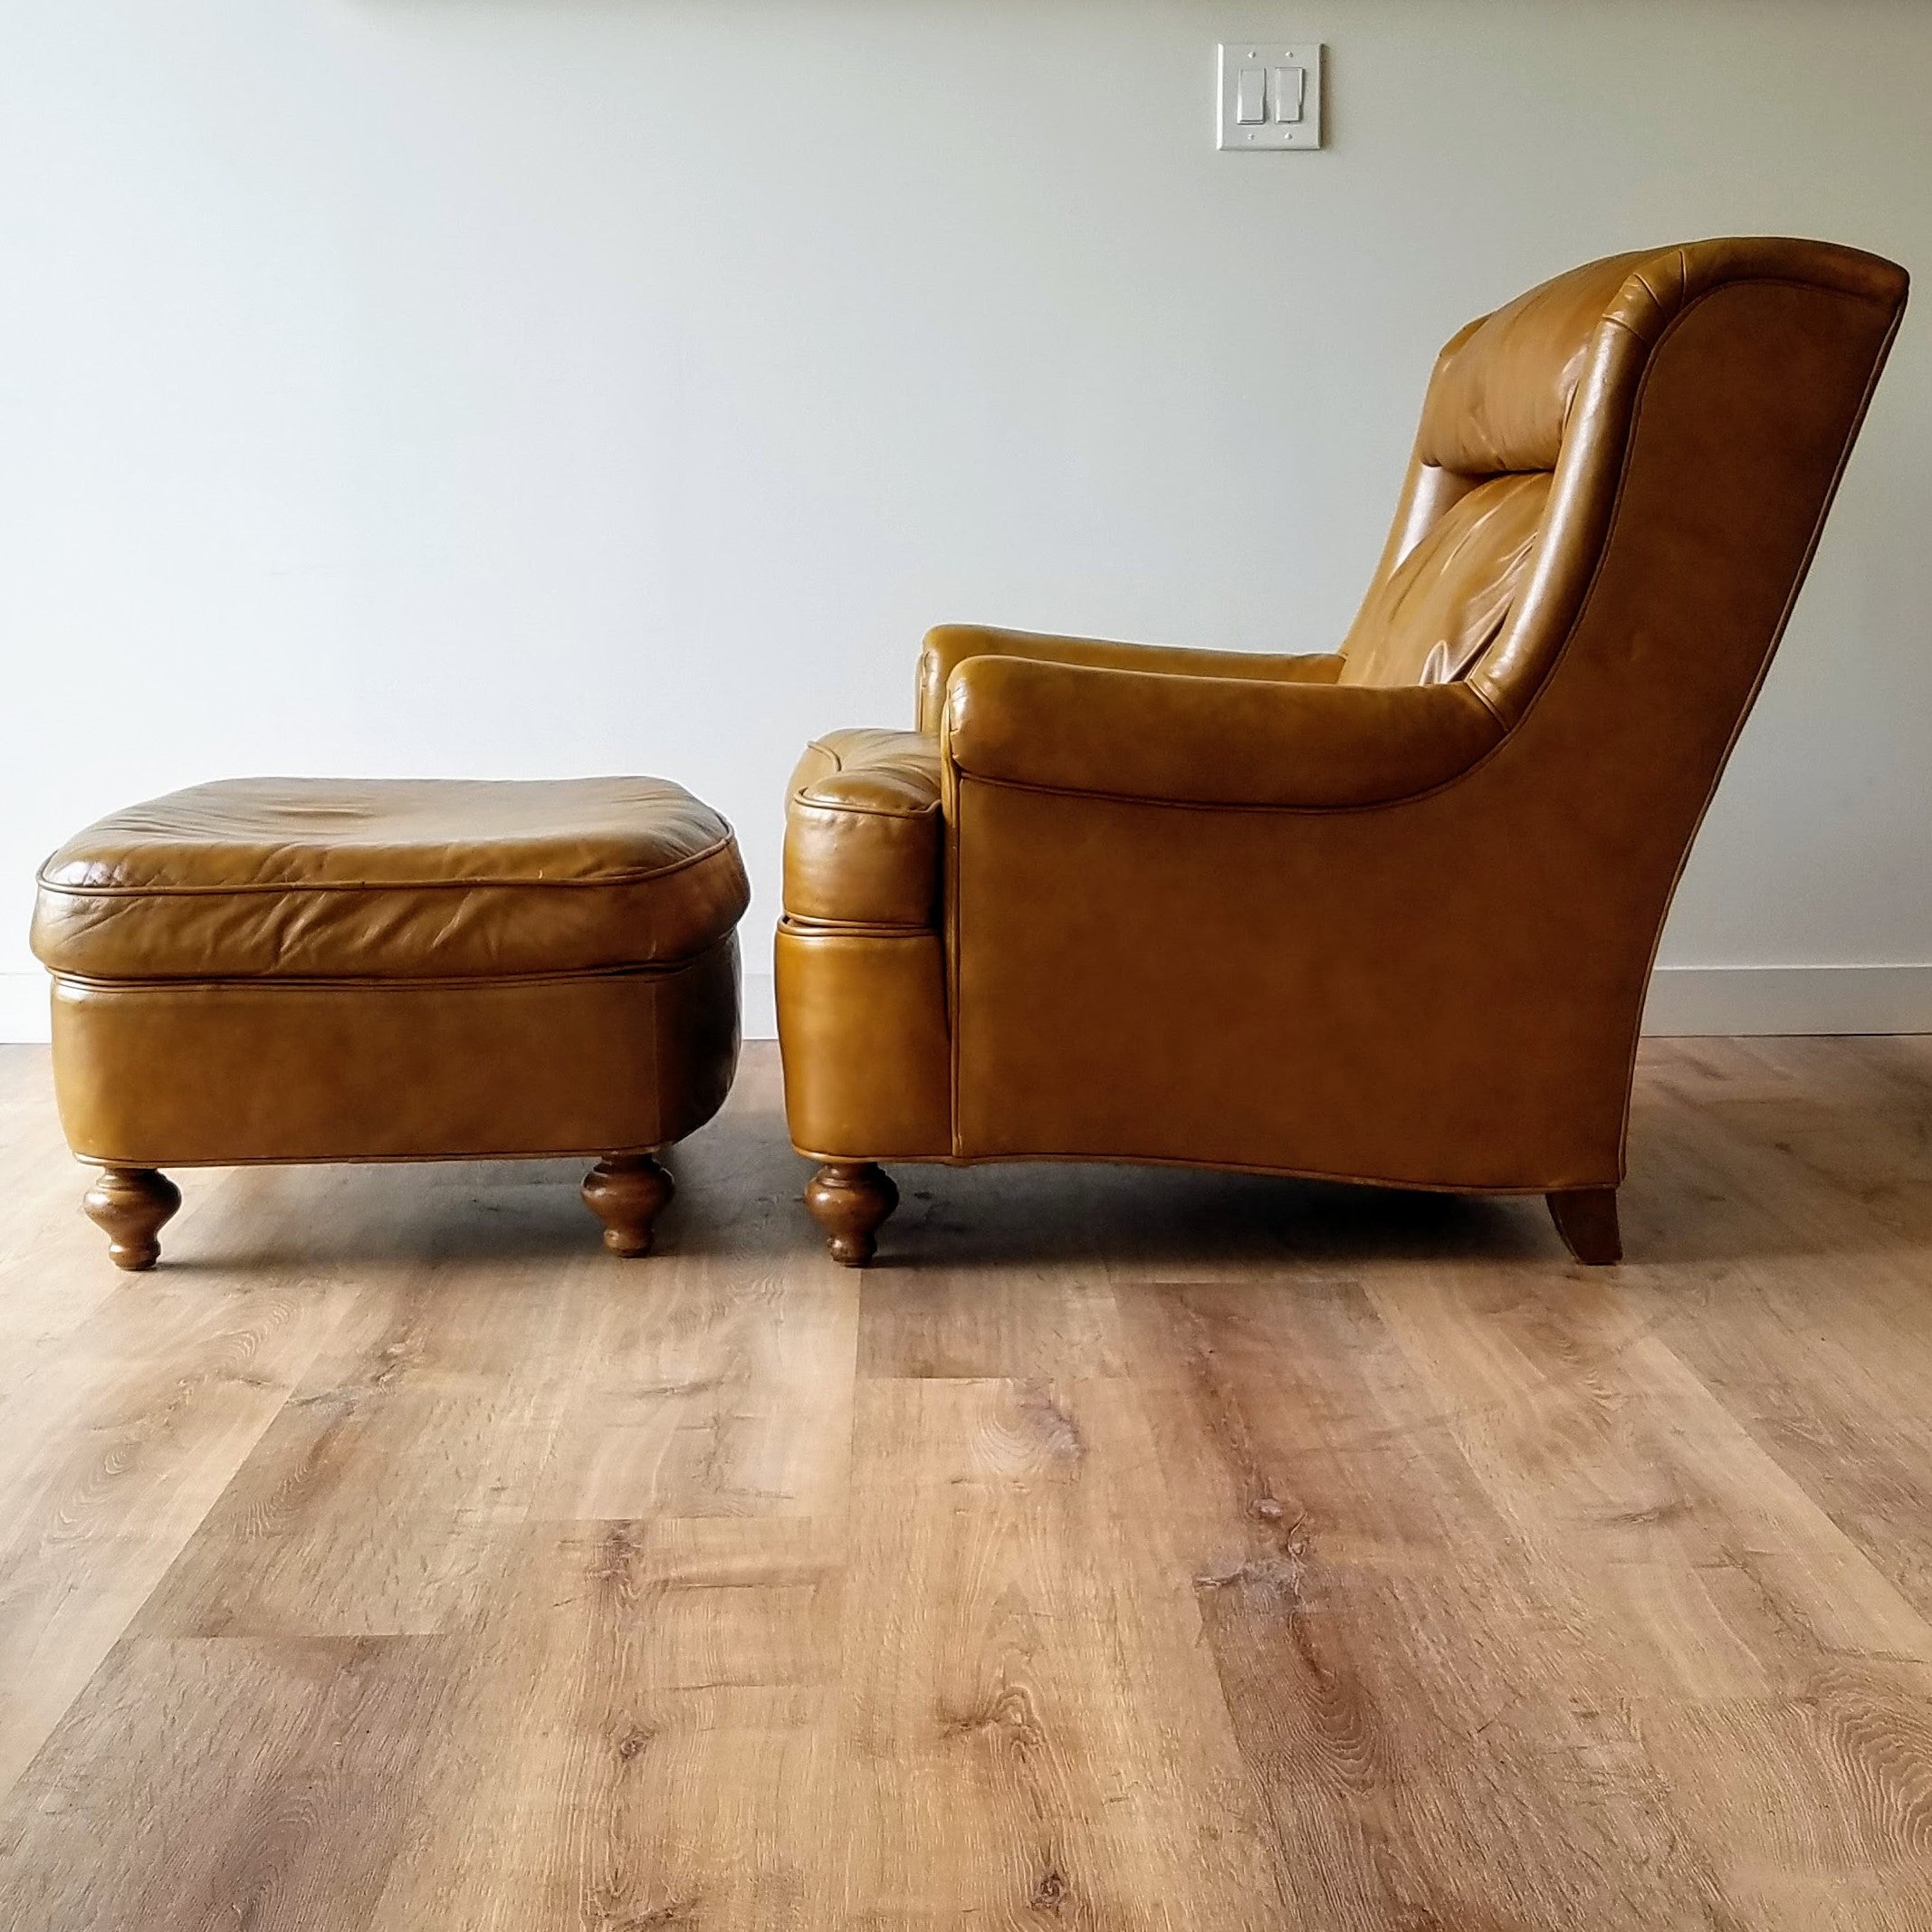 Drexel Heritage Leather Chair + Ottoman